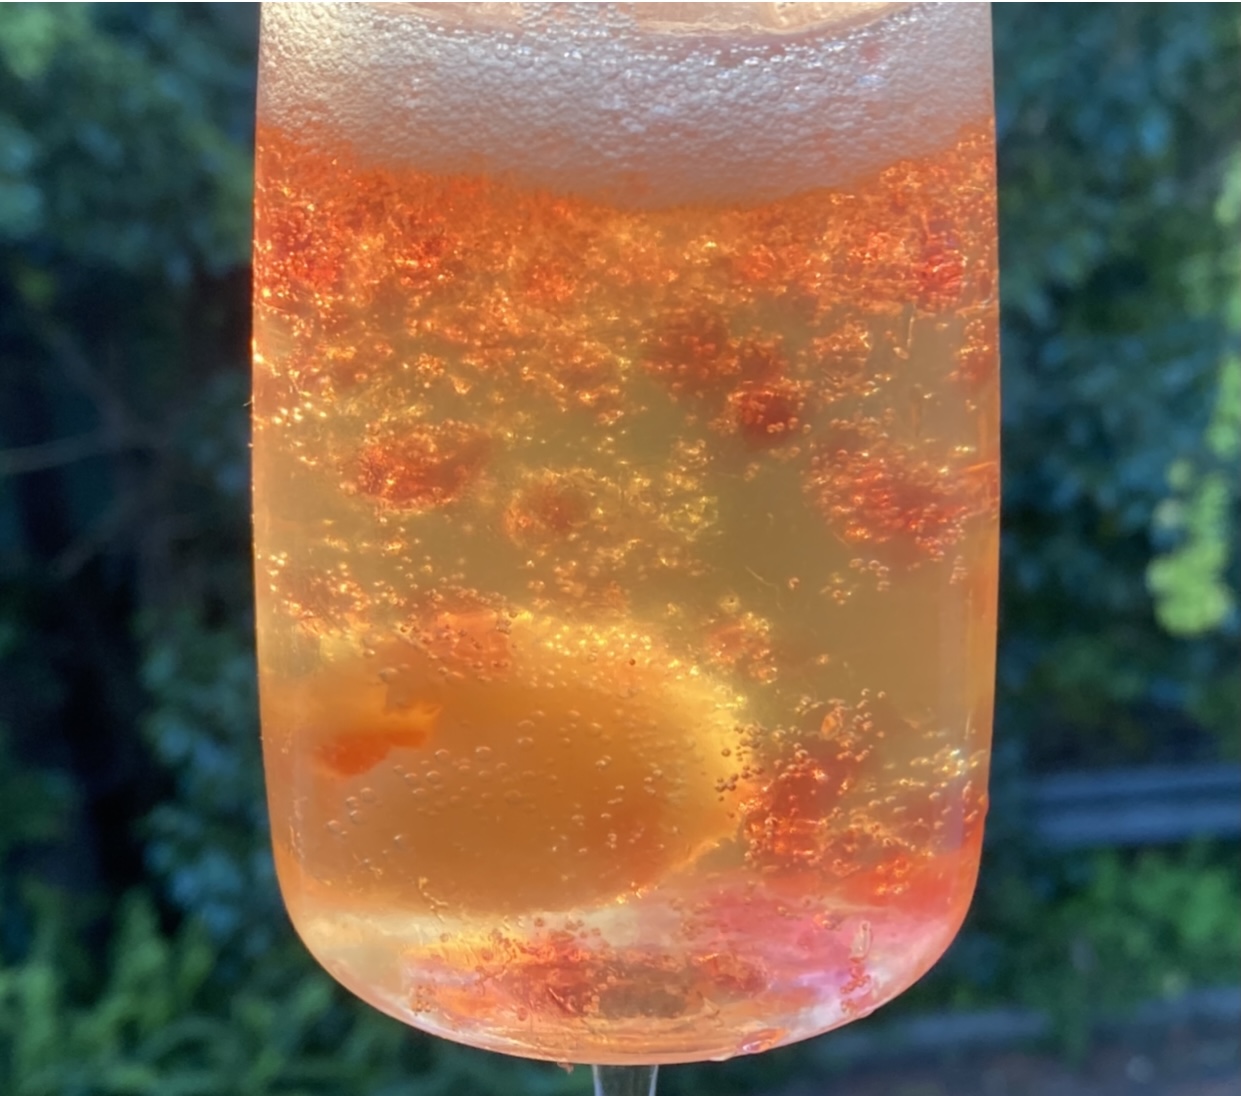 Lychee Rose Cocktail